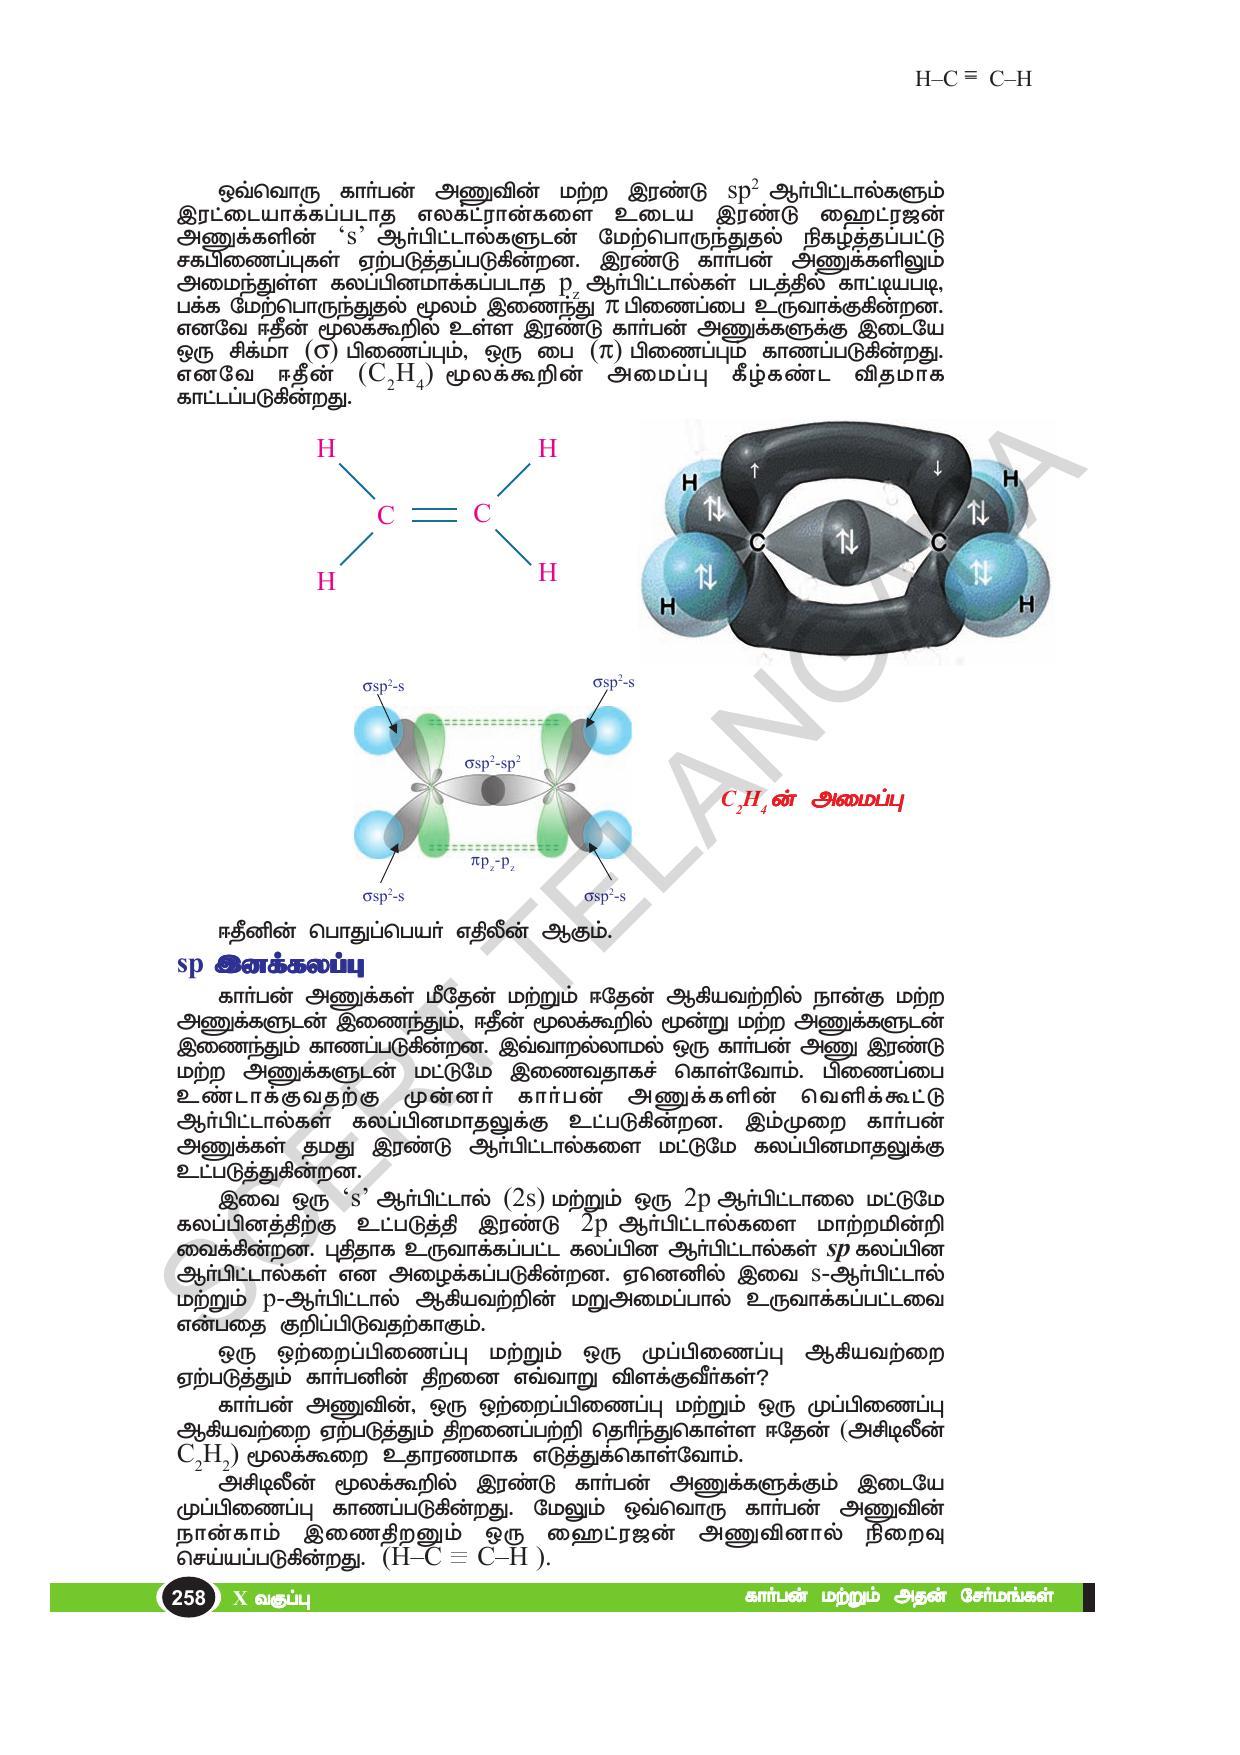 TS SCERT Class 10 Physical Science(Tamil Medium) Text Book - Page 270